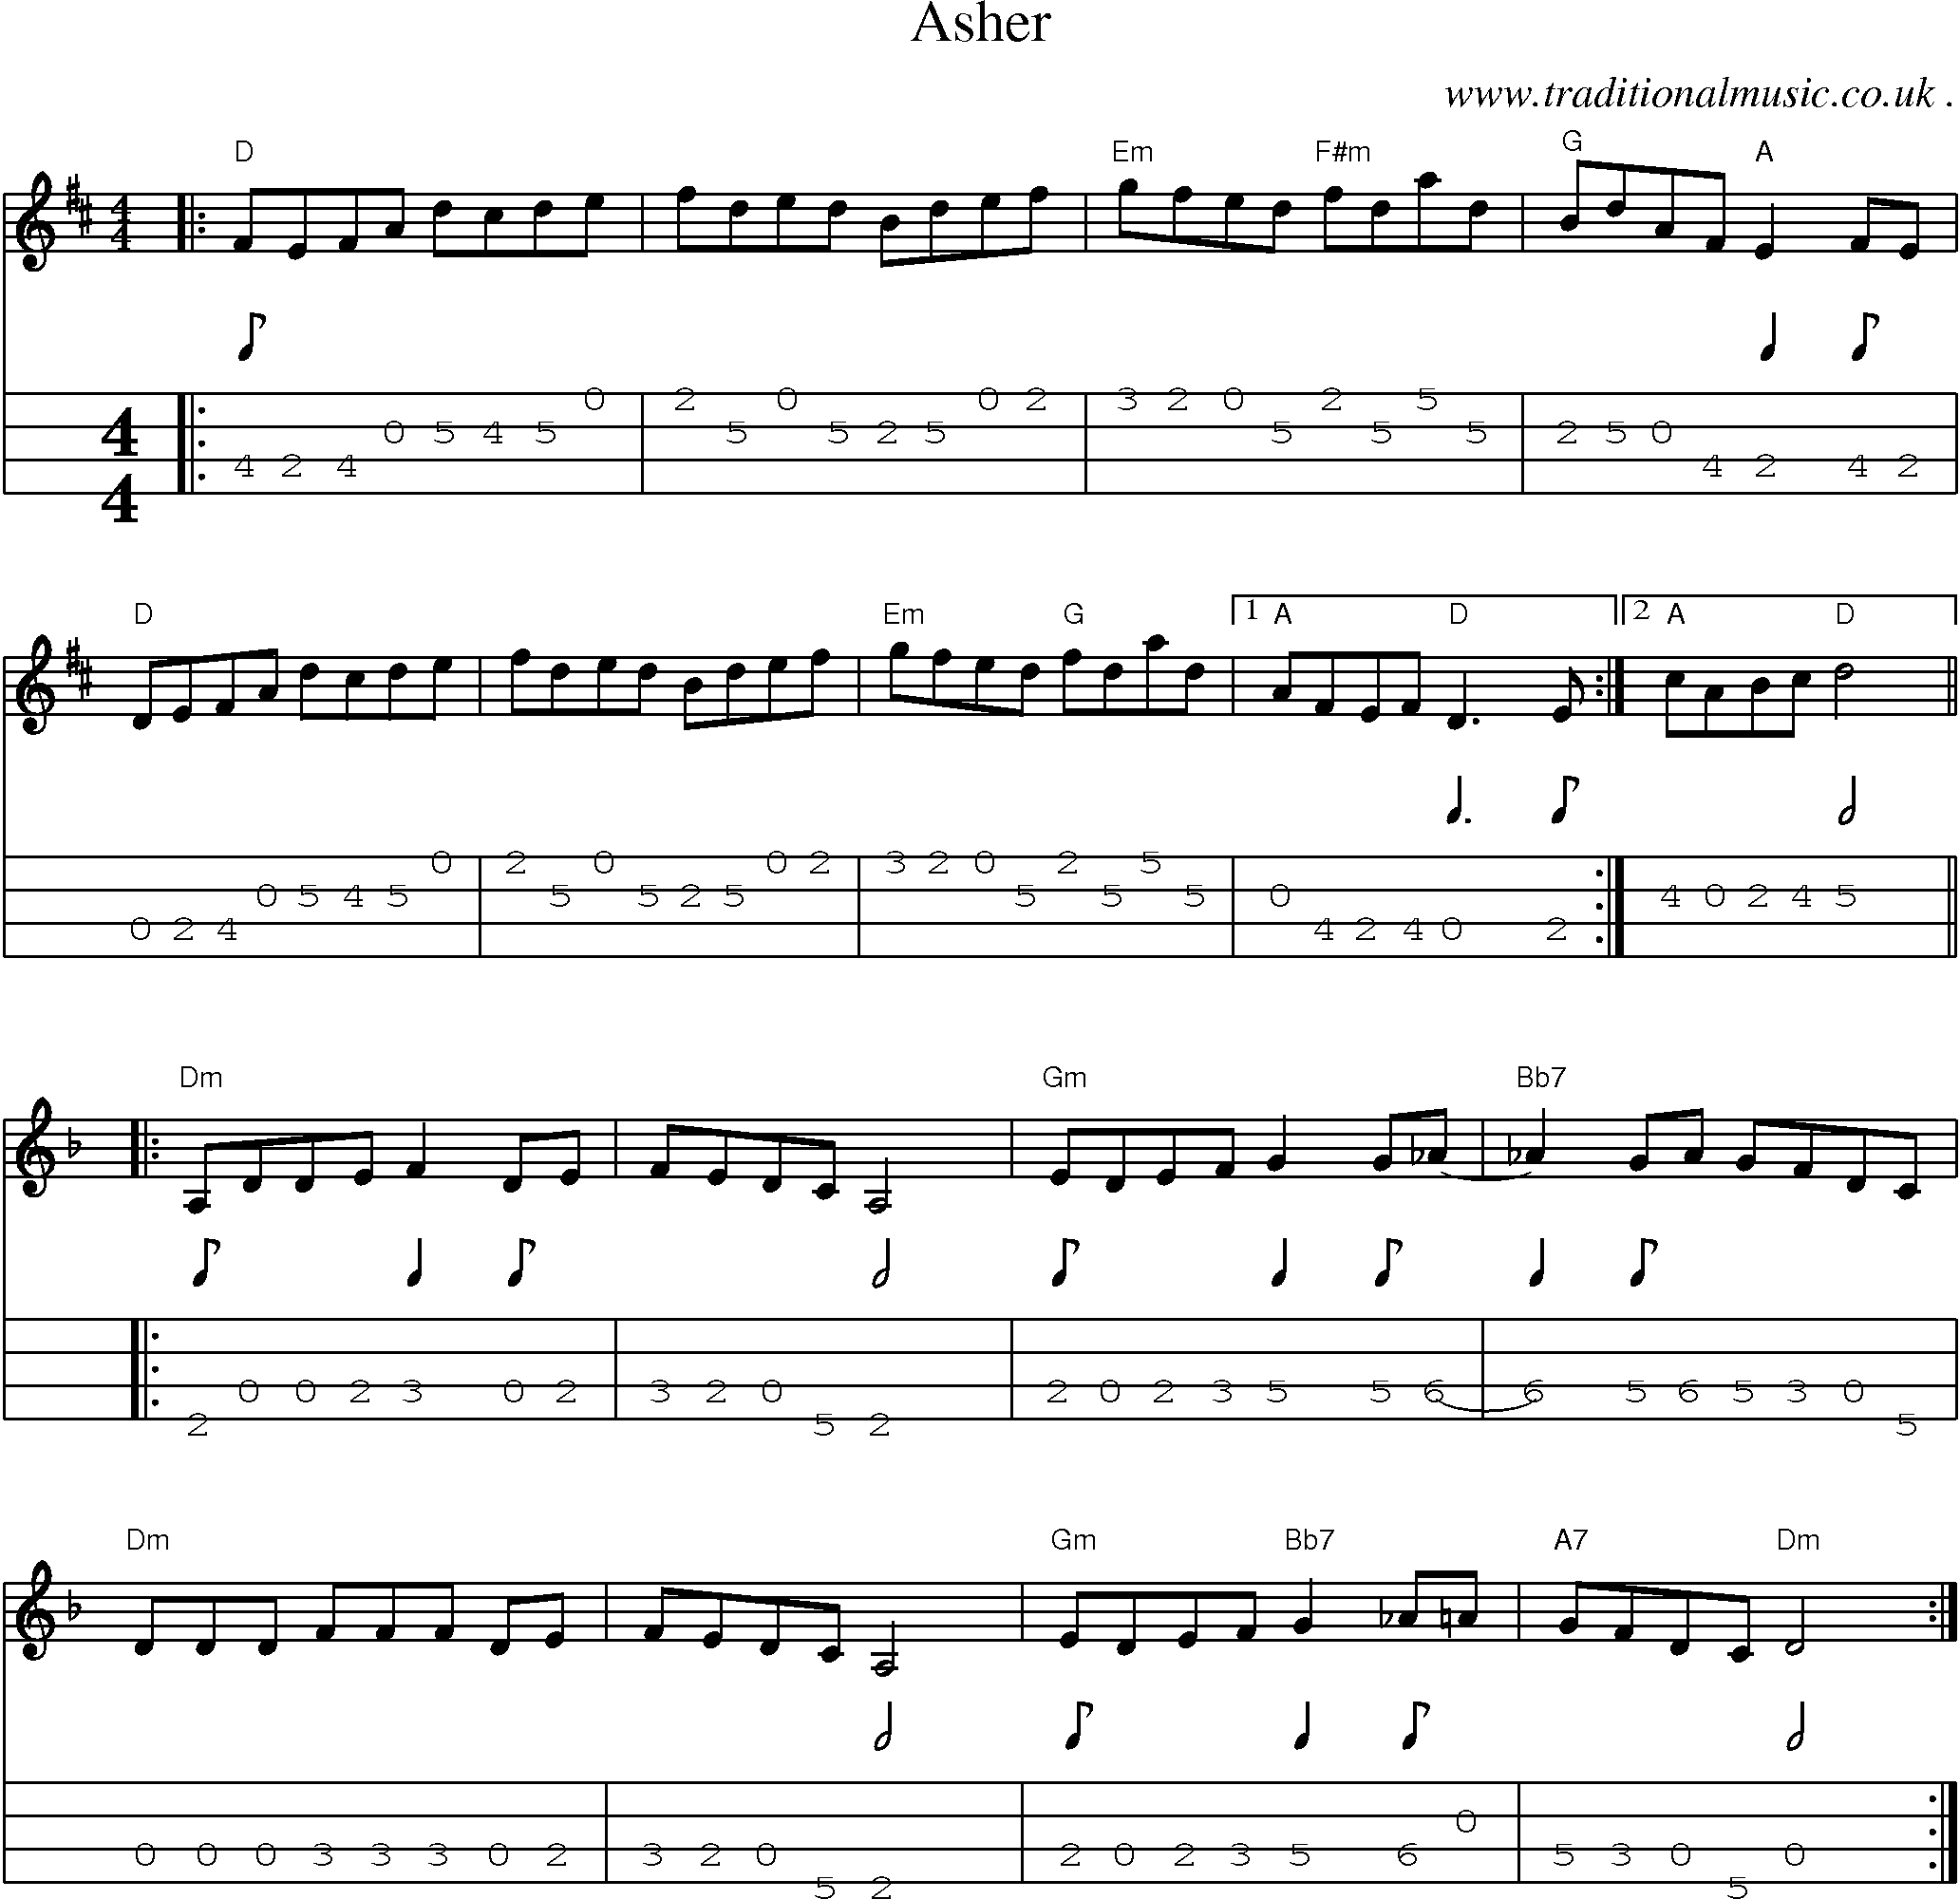 Music Score and Guitar Tabs for Asher